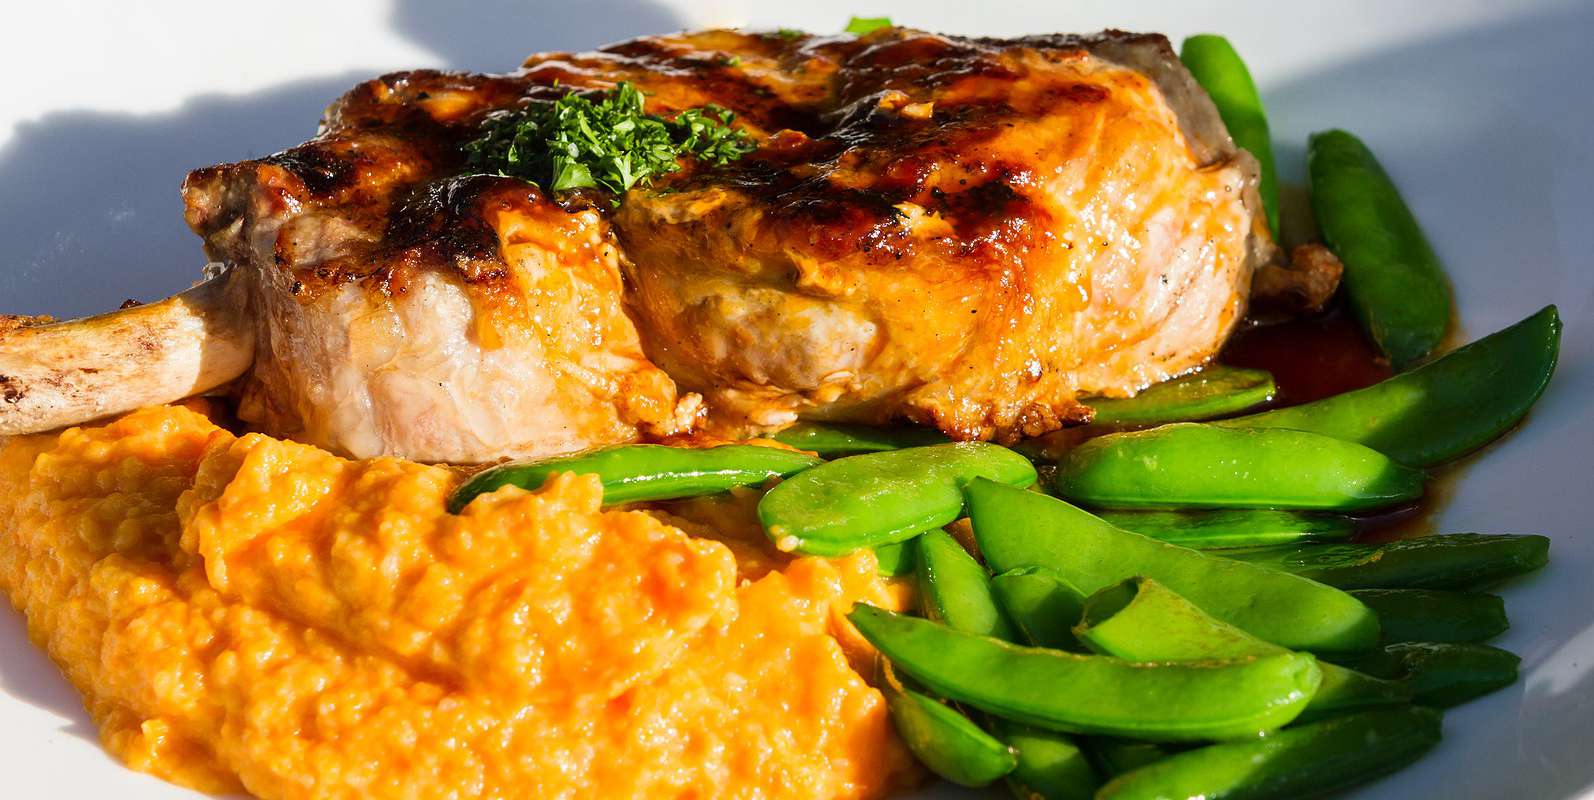 Pork Chops With Mashed Parsnips & Green Beans